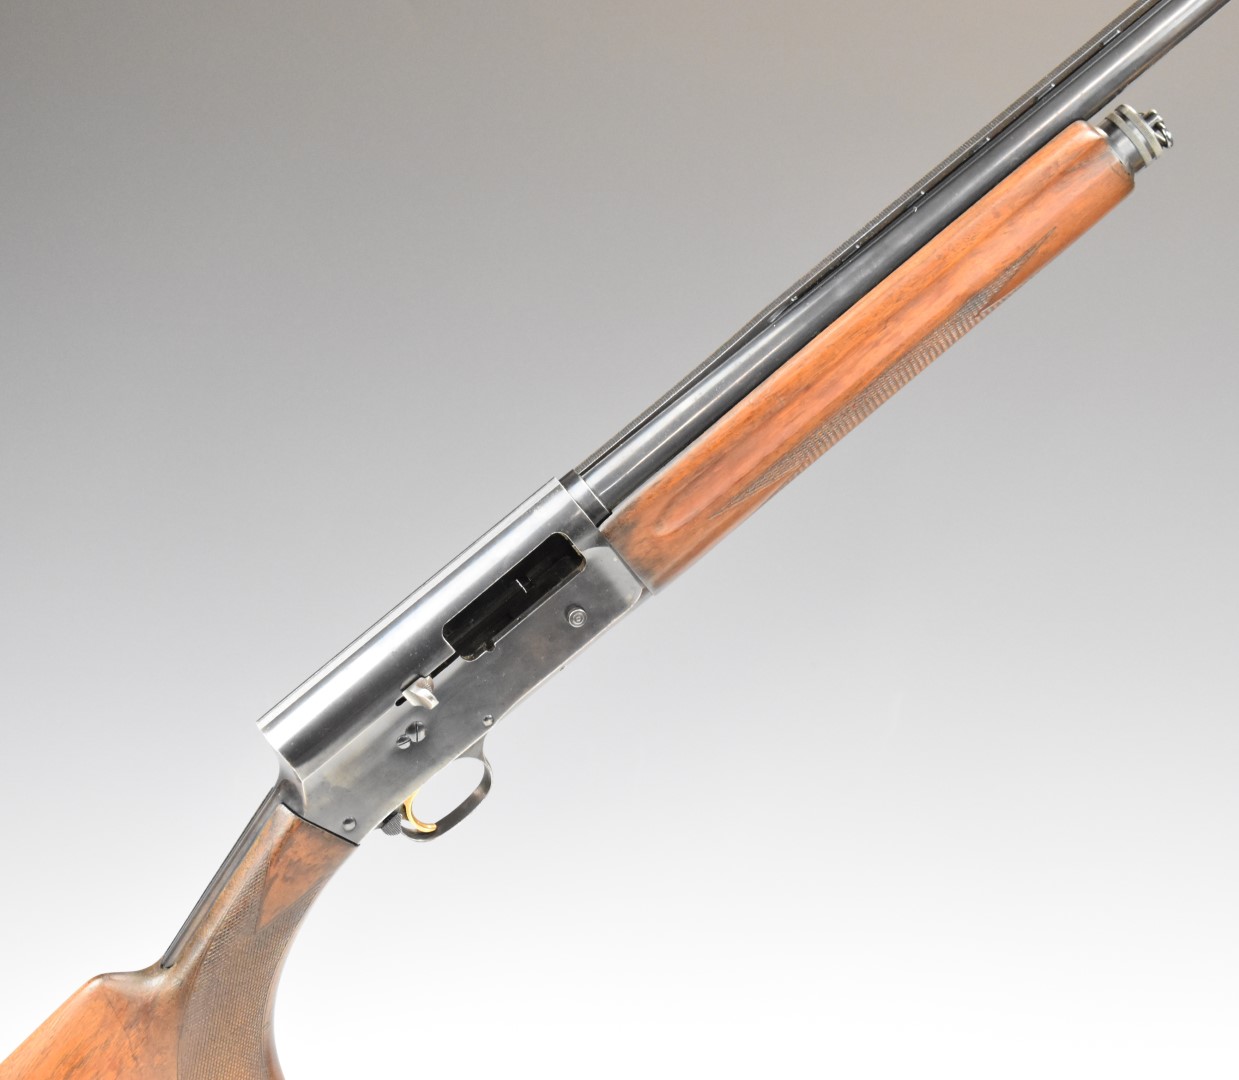 Browning 16 bore 3-shot semi-automatic shotgun with chequered semi-pistol grip and forend and 27